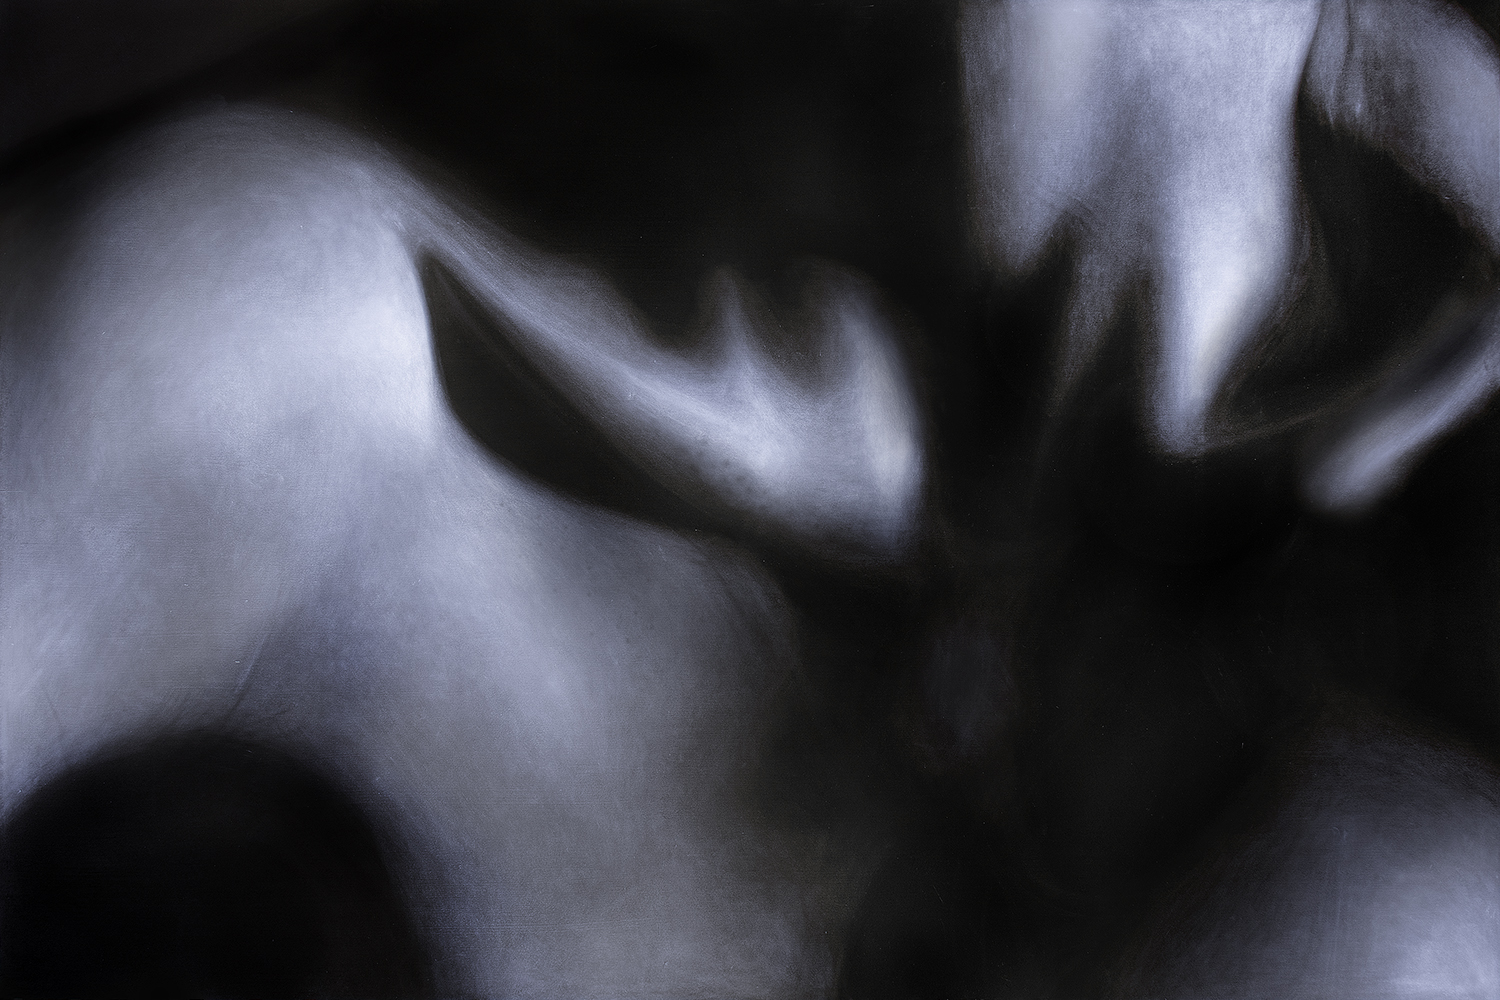 A closely cropped image of a figure’s collarbones defined by harsh shadows, featuring skin texture and the underlying skeletal structure.